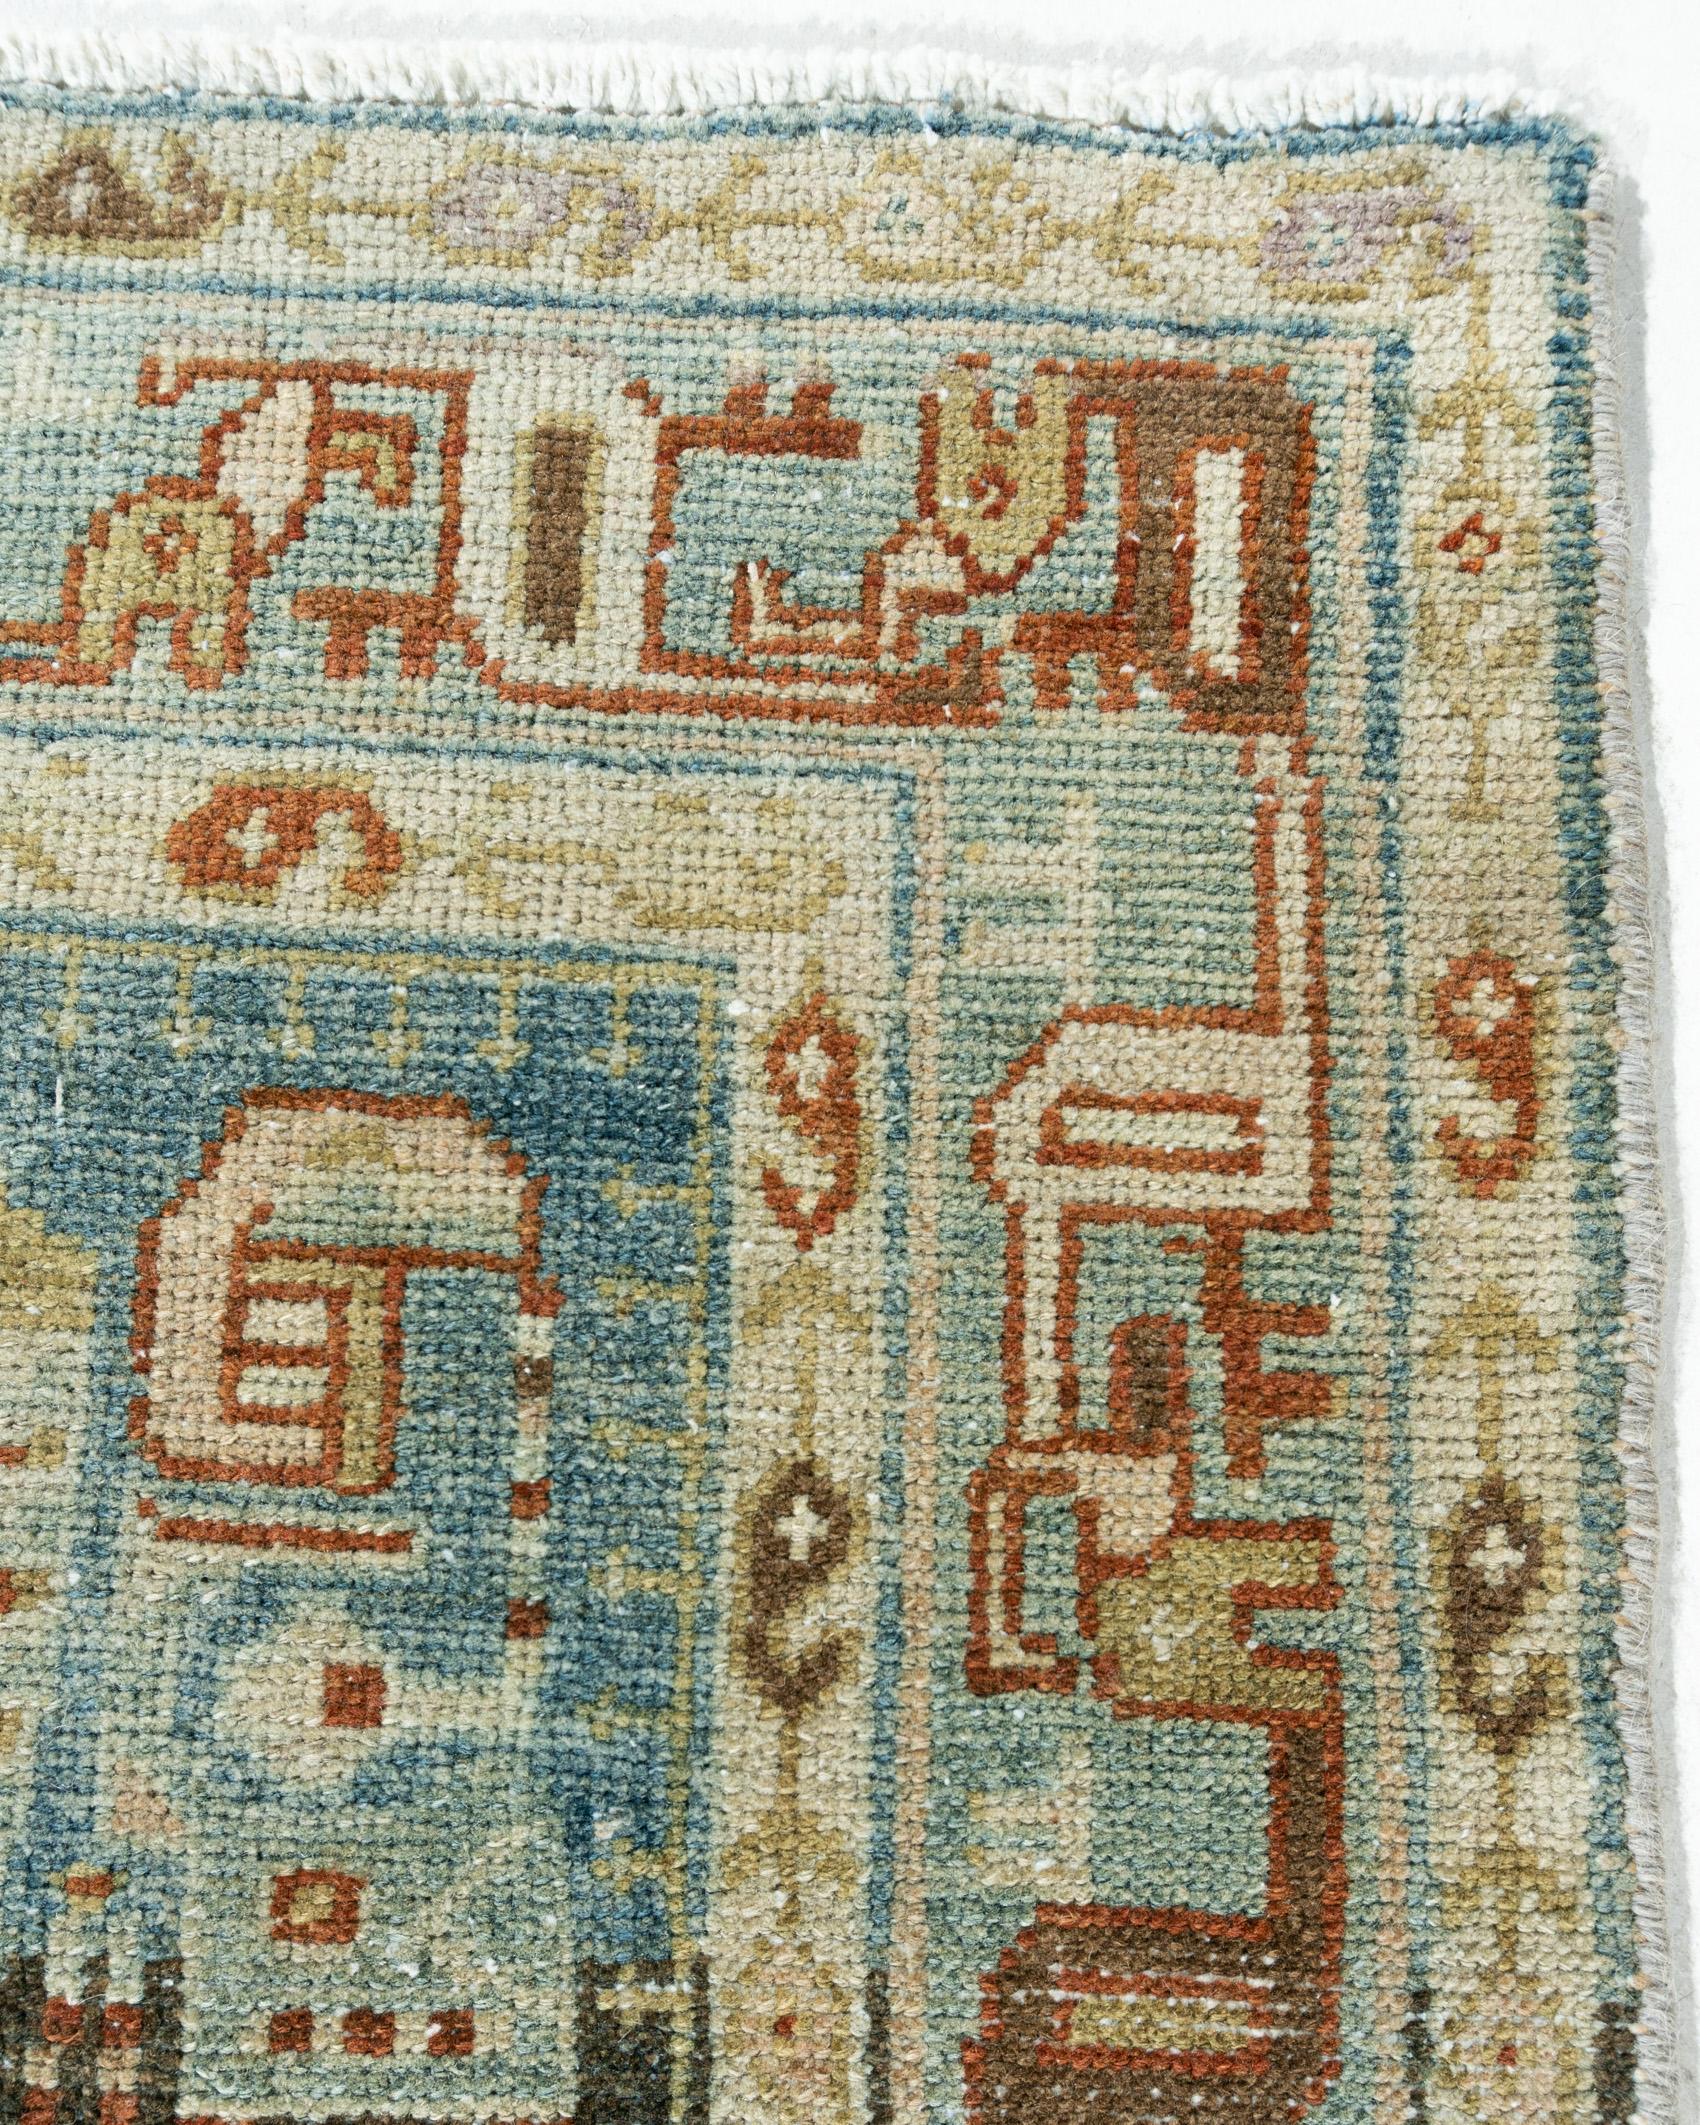 Antique Persian Malayer Area rug, measures 3'6 X 5'. Rugs from Malayer, east of Hamadan, could be considered top quality Hamadan’s and they share similar structural aspects. The wonderful soft pastel blues of the border contrast so well with the